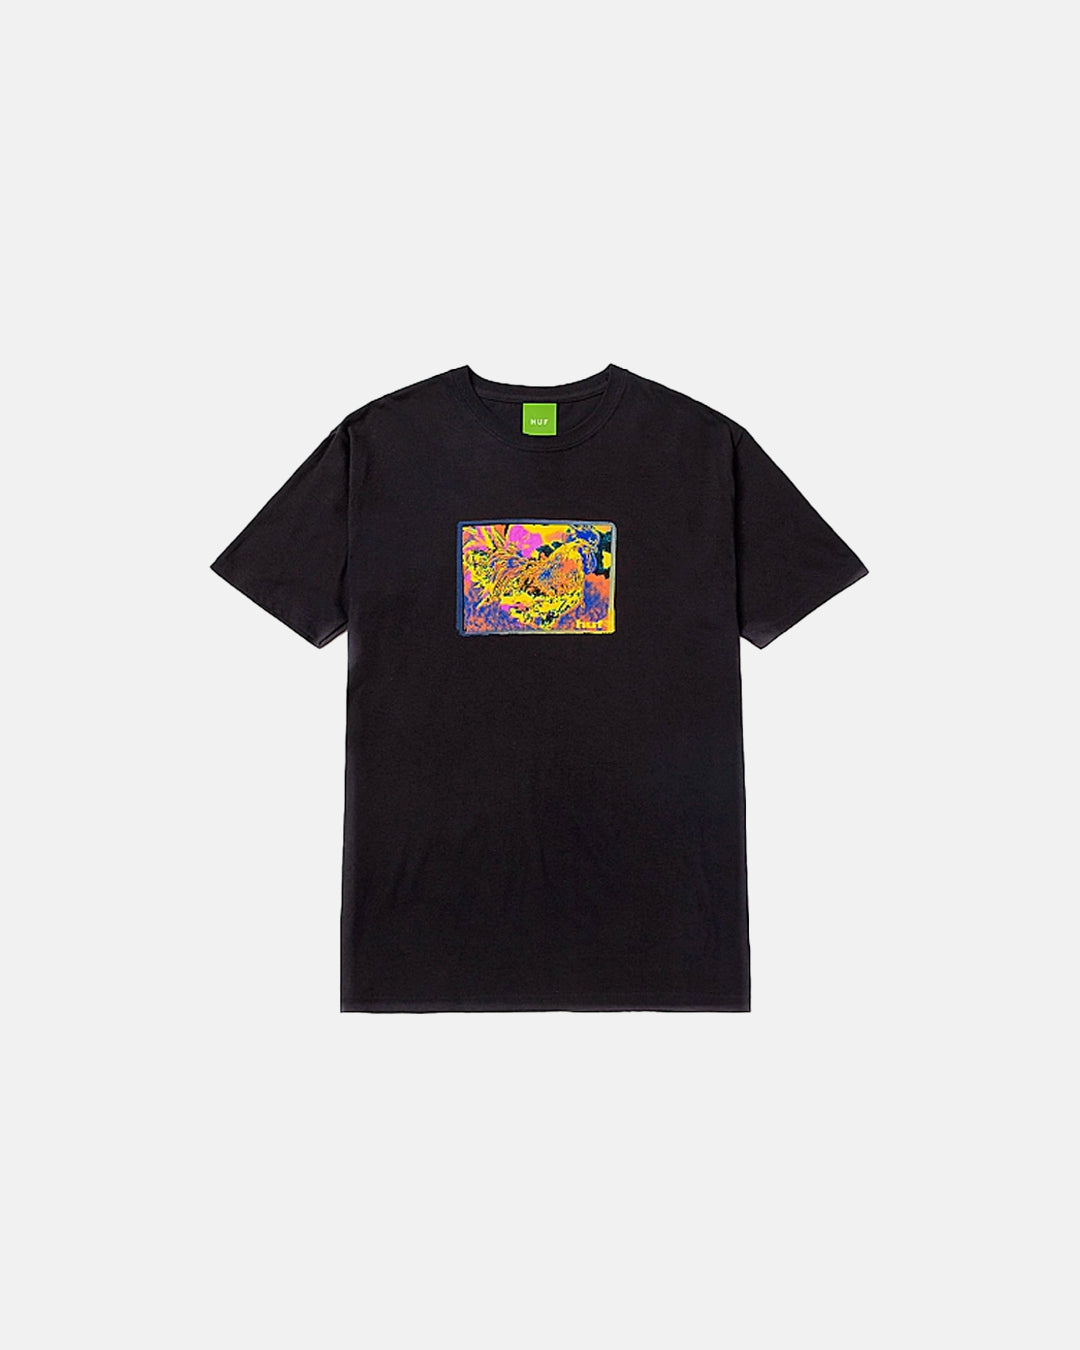 THE ROOSTER S/S TEE